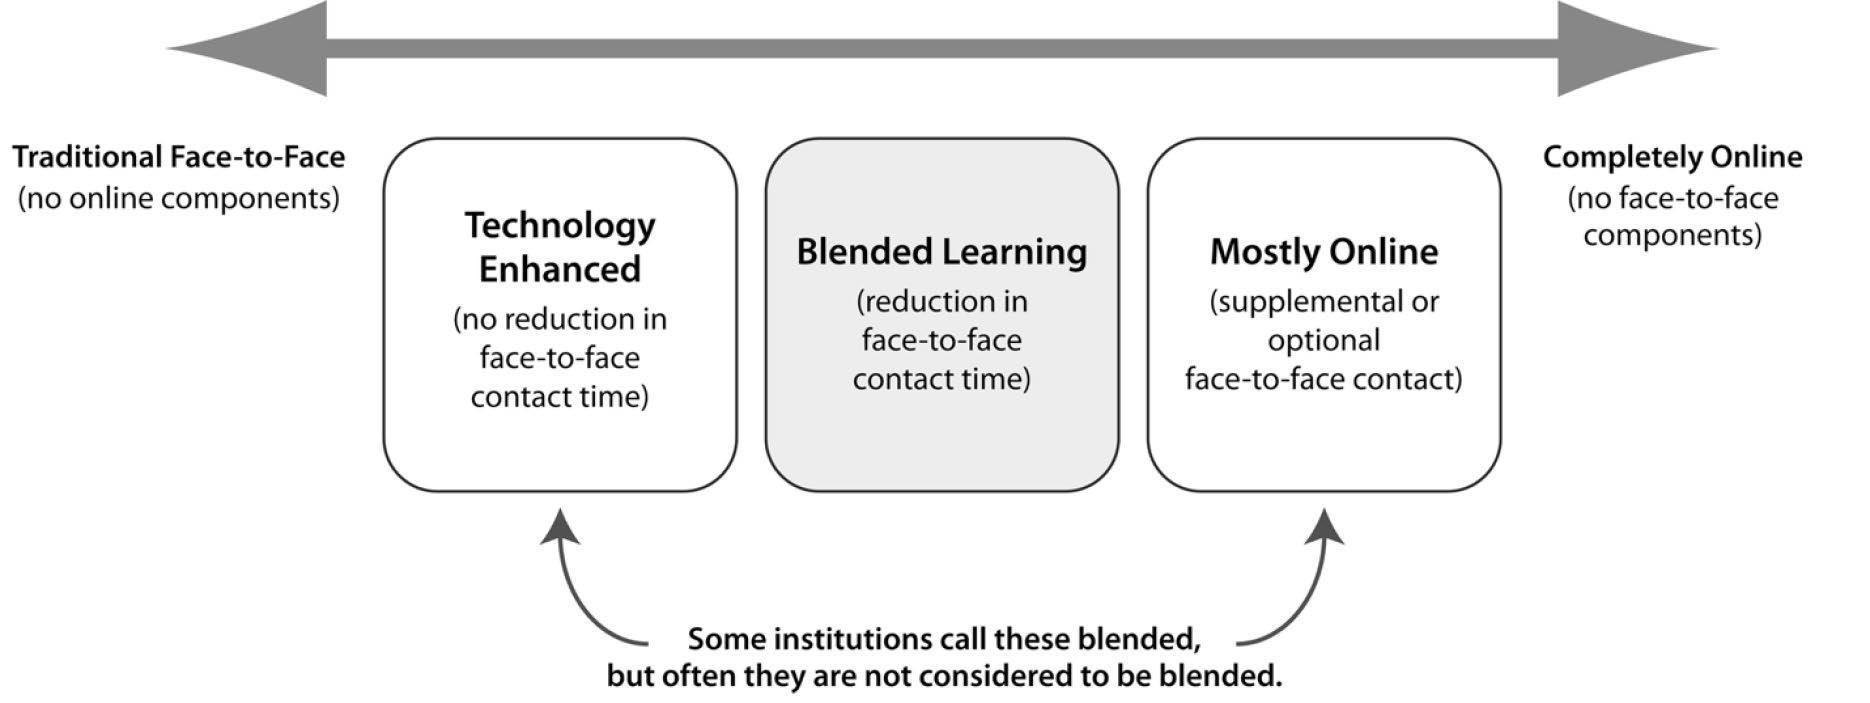 CHAPTER 4: Designing for Blended Learning – Guide to Blended Learning